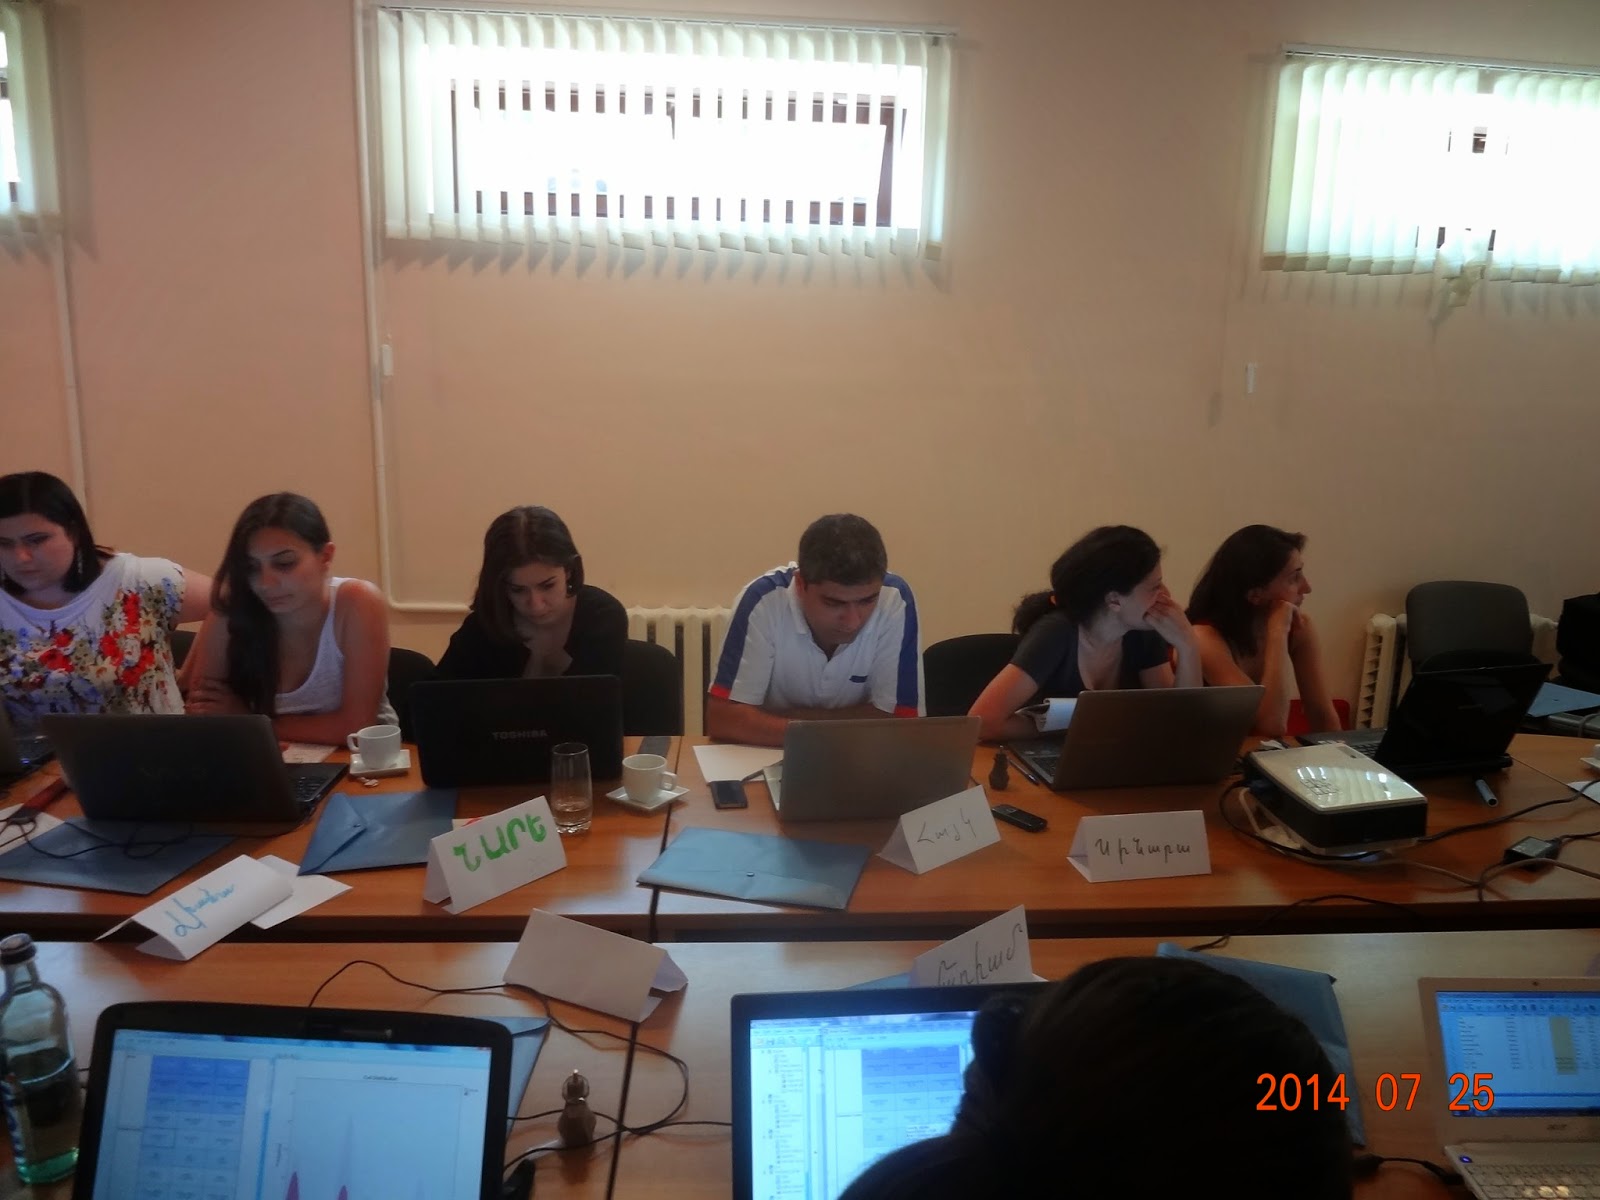 CRRC-Armenia Summer School: The First Time Does Count!